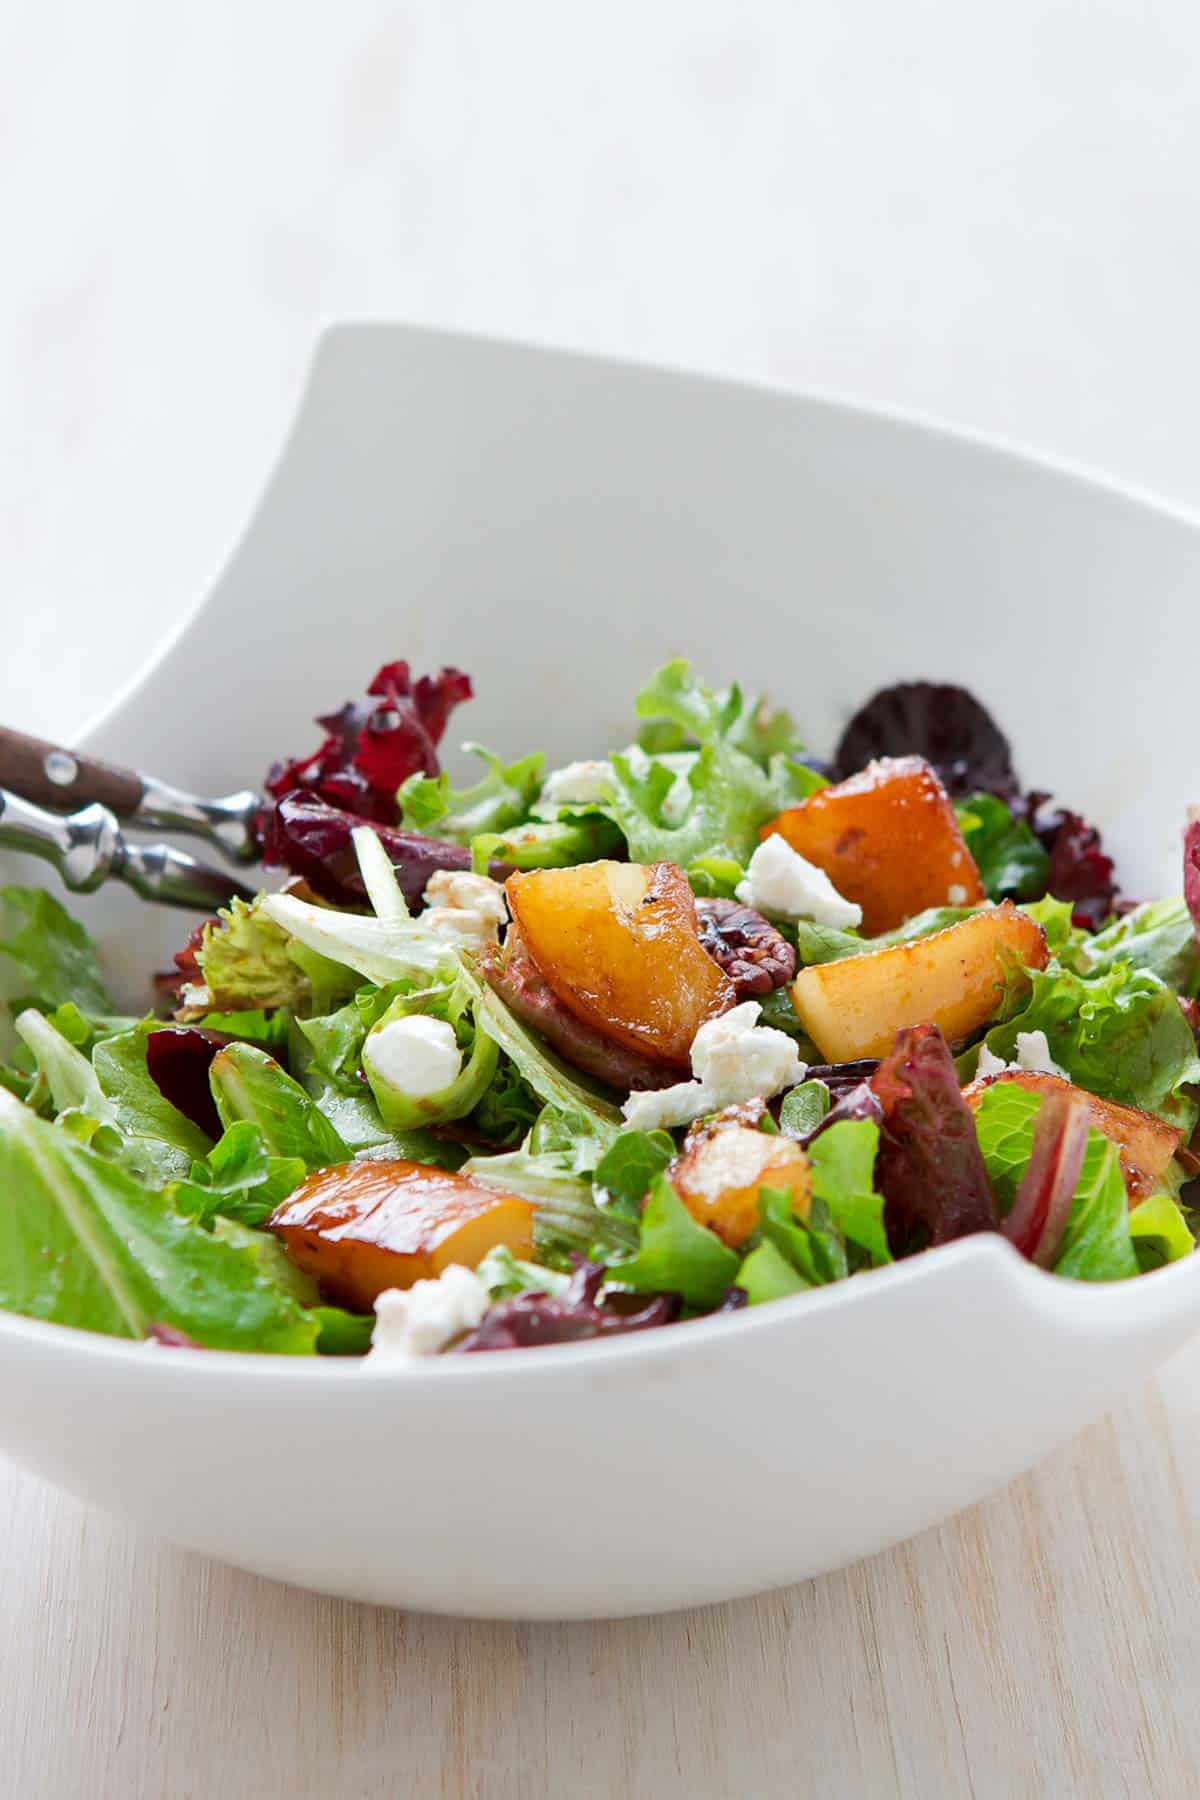 Pear salad in a large white bowl, with mixed greens, goat cheese and glazed pear chunks.